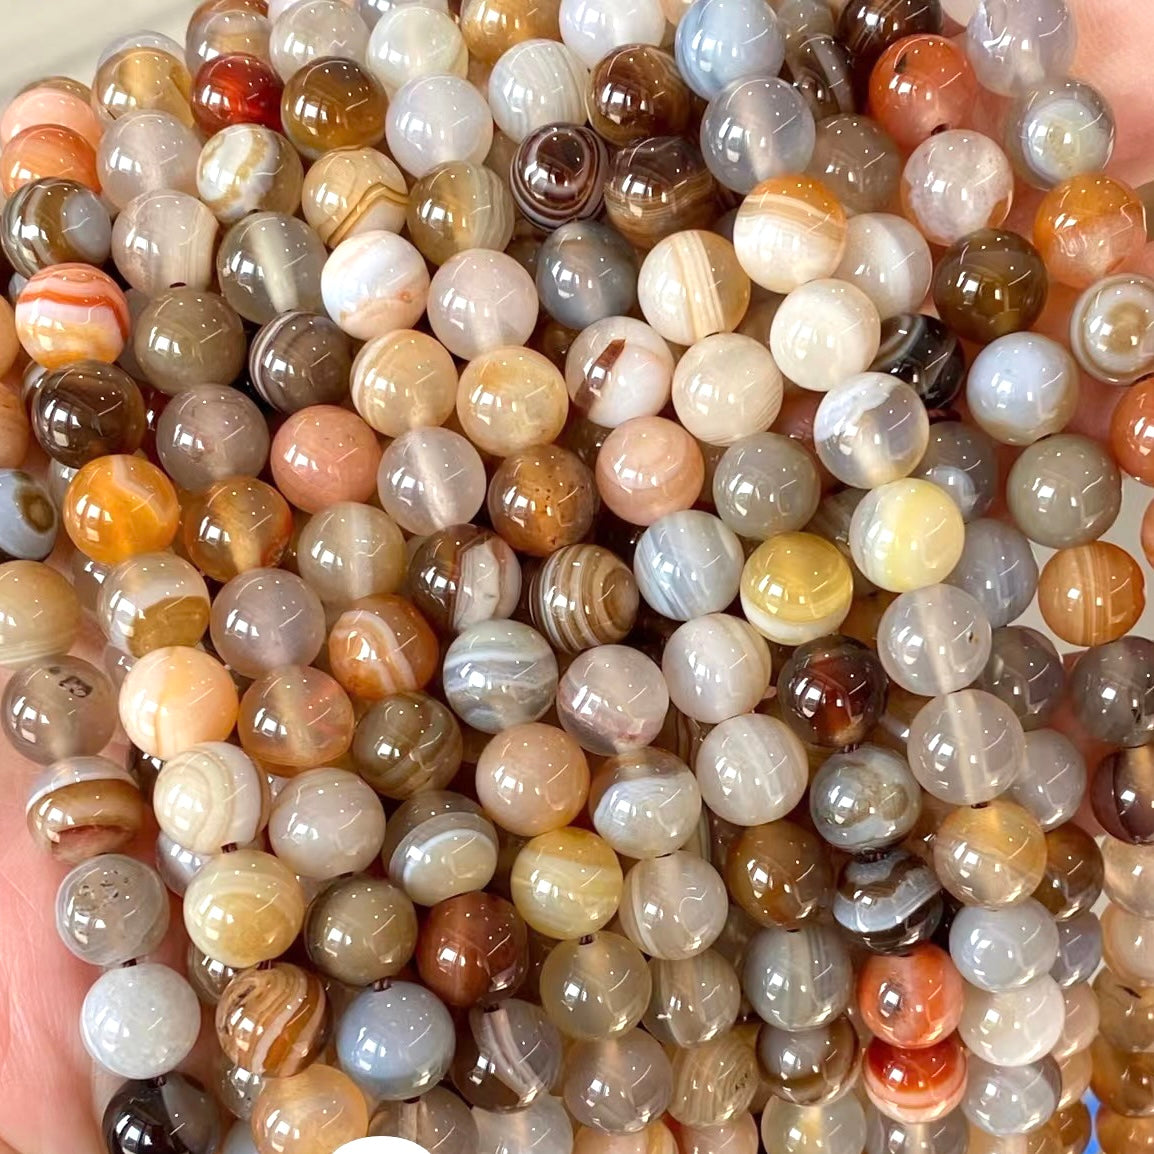 2 Strands/lot 10mm Yellow Botswana Agate Stone Round Beads Stone Beads New Beads Arrivals Other Stone Beads Round Agate Beads Charms Beads Beyond